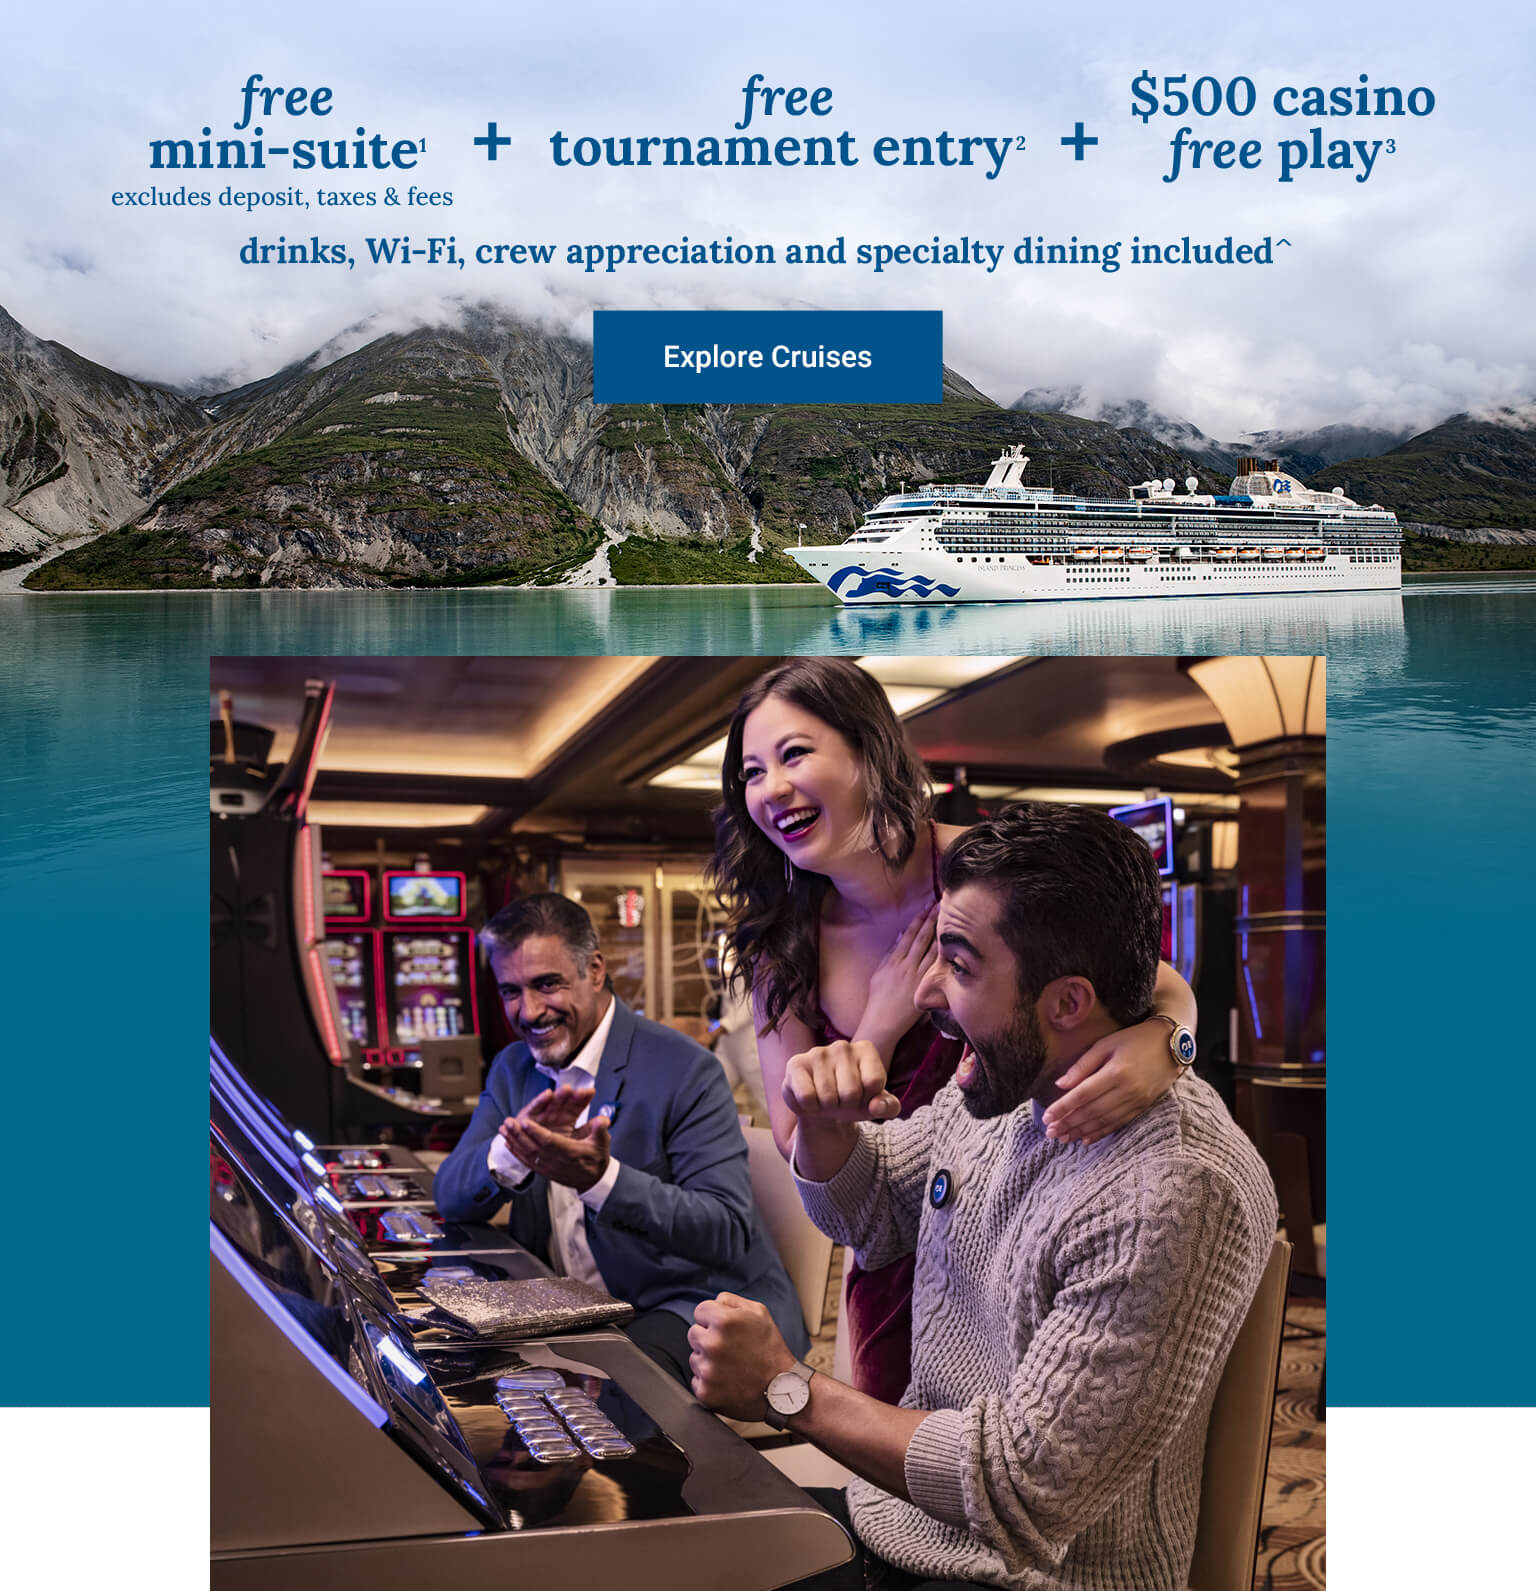 free mini-suite[1] (excludes deposit, taxes & fees) + free tournament entry[2] + $500 casino free play[3] + drinks, Wi-Fi, crew appreciation and specialty dining included^